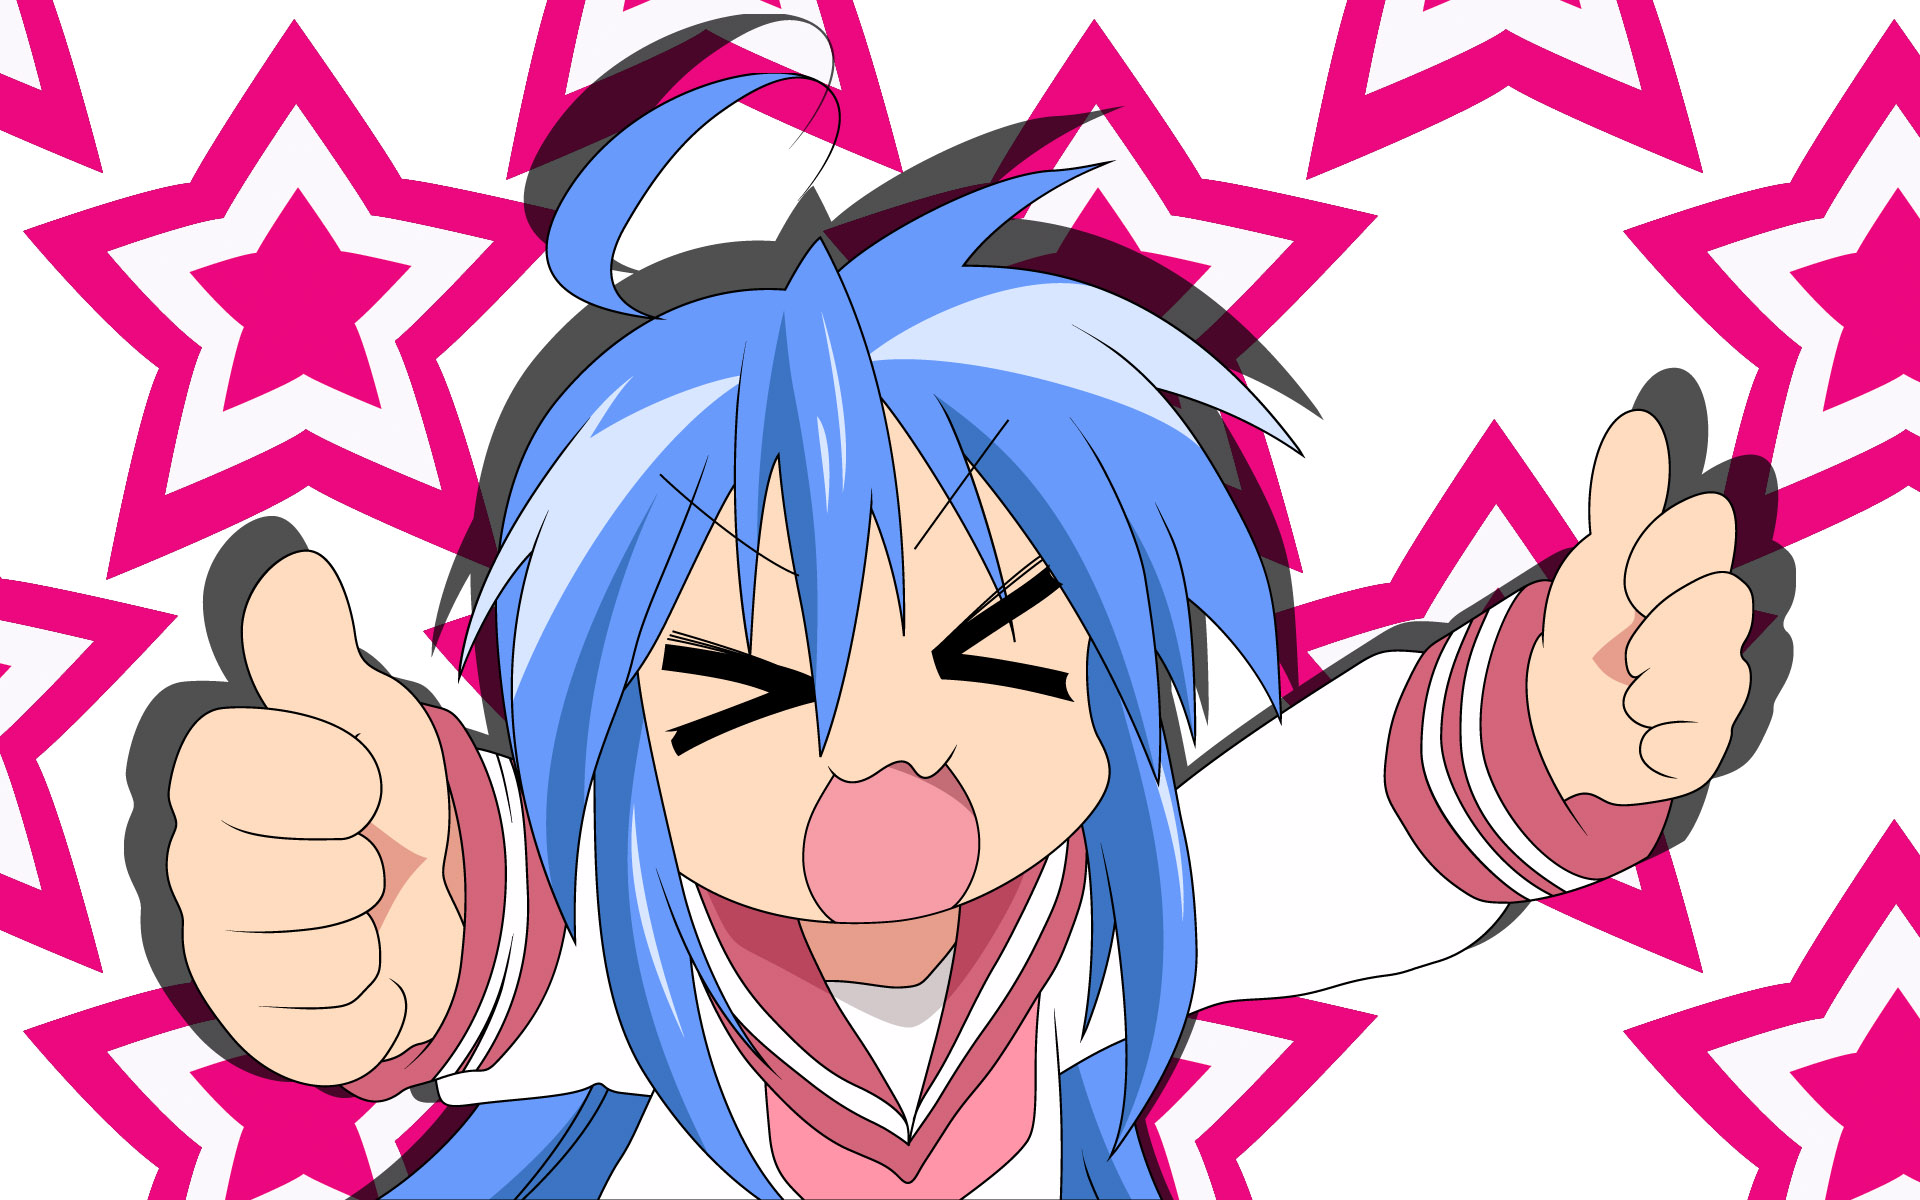 Konata Izumi from Lucky Star, a popular anime character, is featured in this desktop wallpaper.